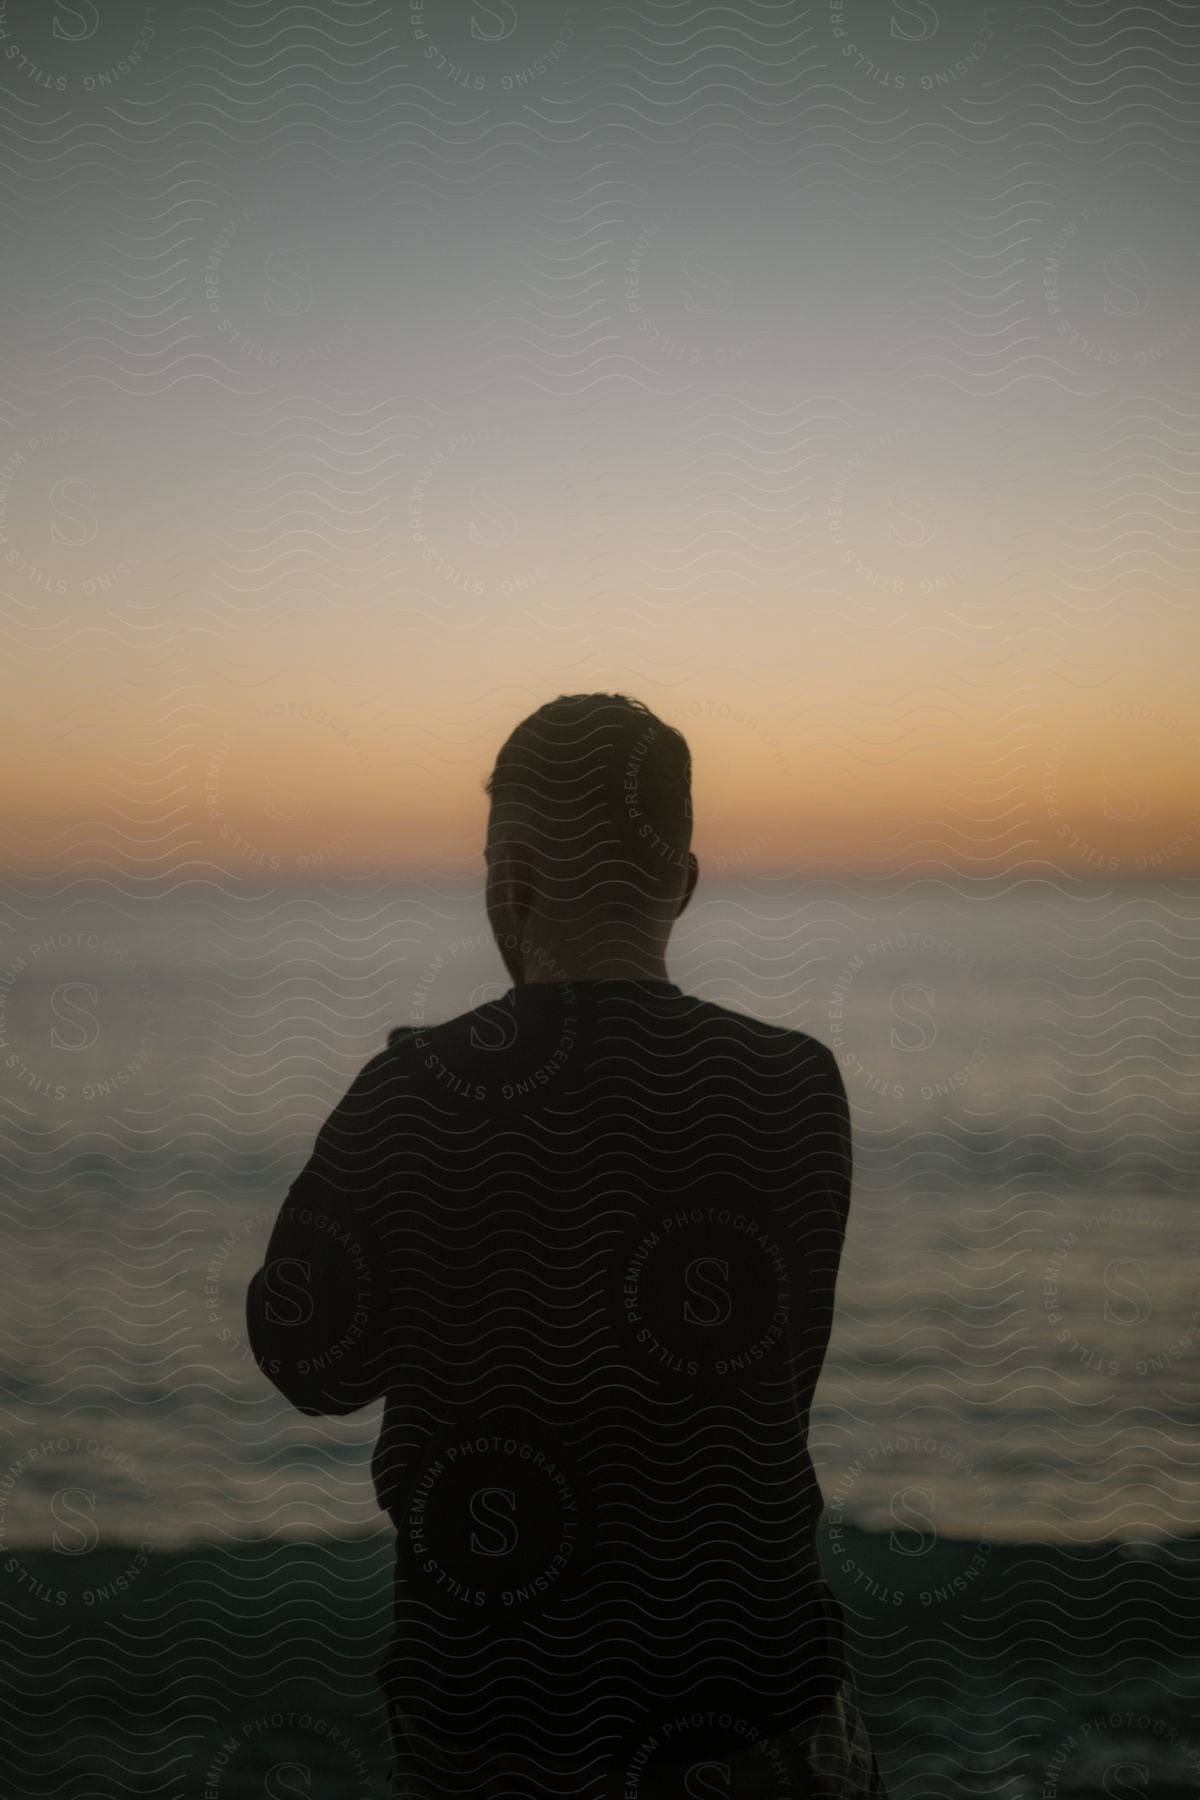 Silhouette of a person sitting in front of the ocean at evening